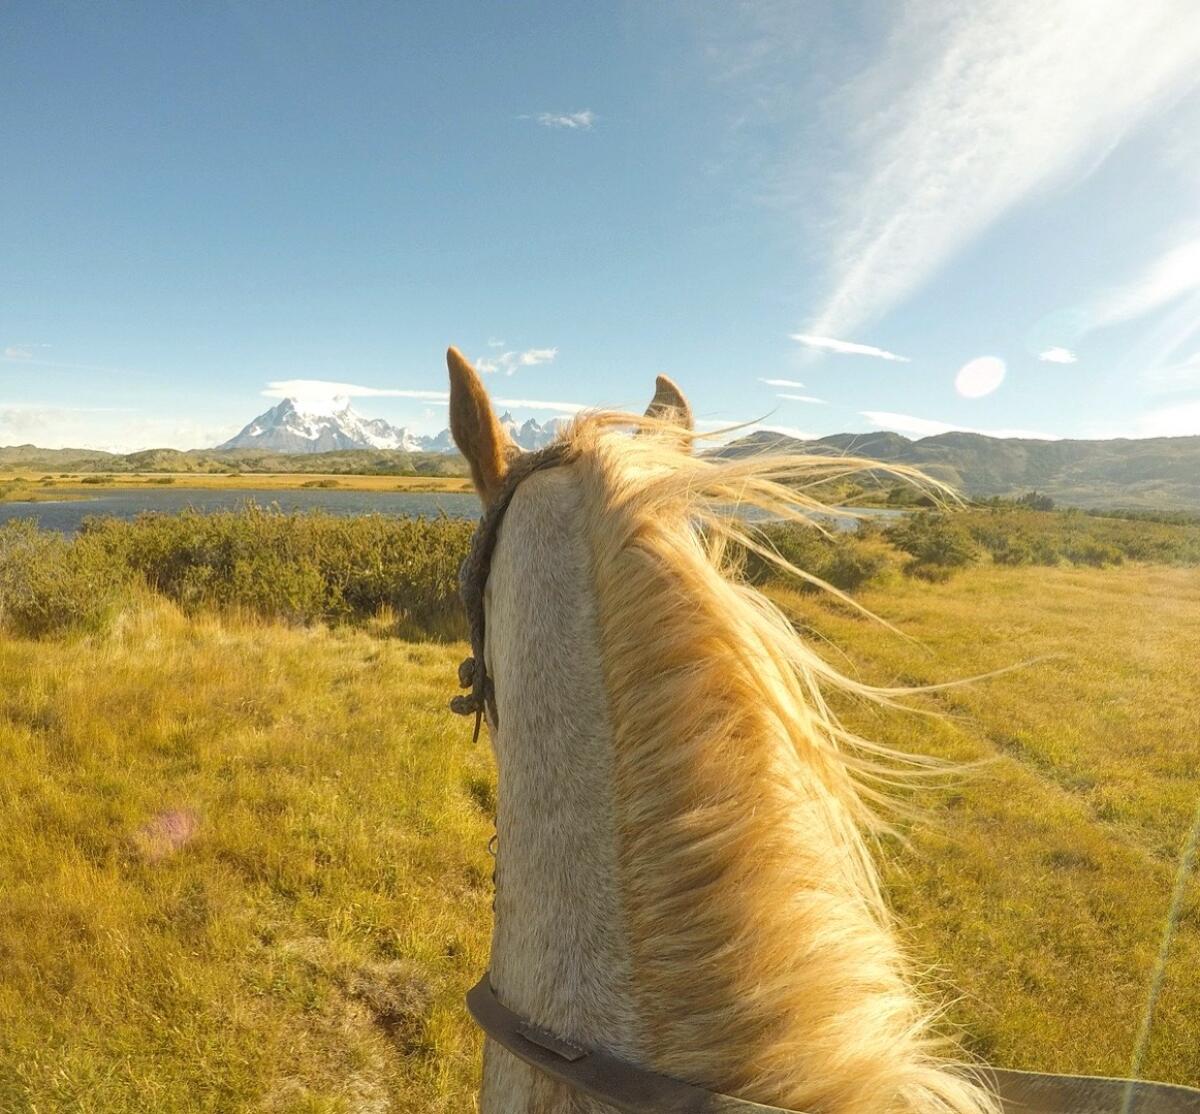 A horse looks across a field at a snow-capped mountain.